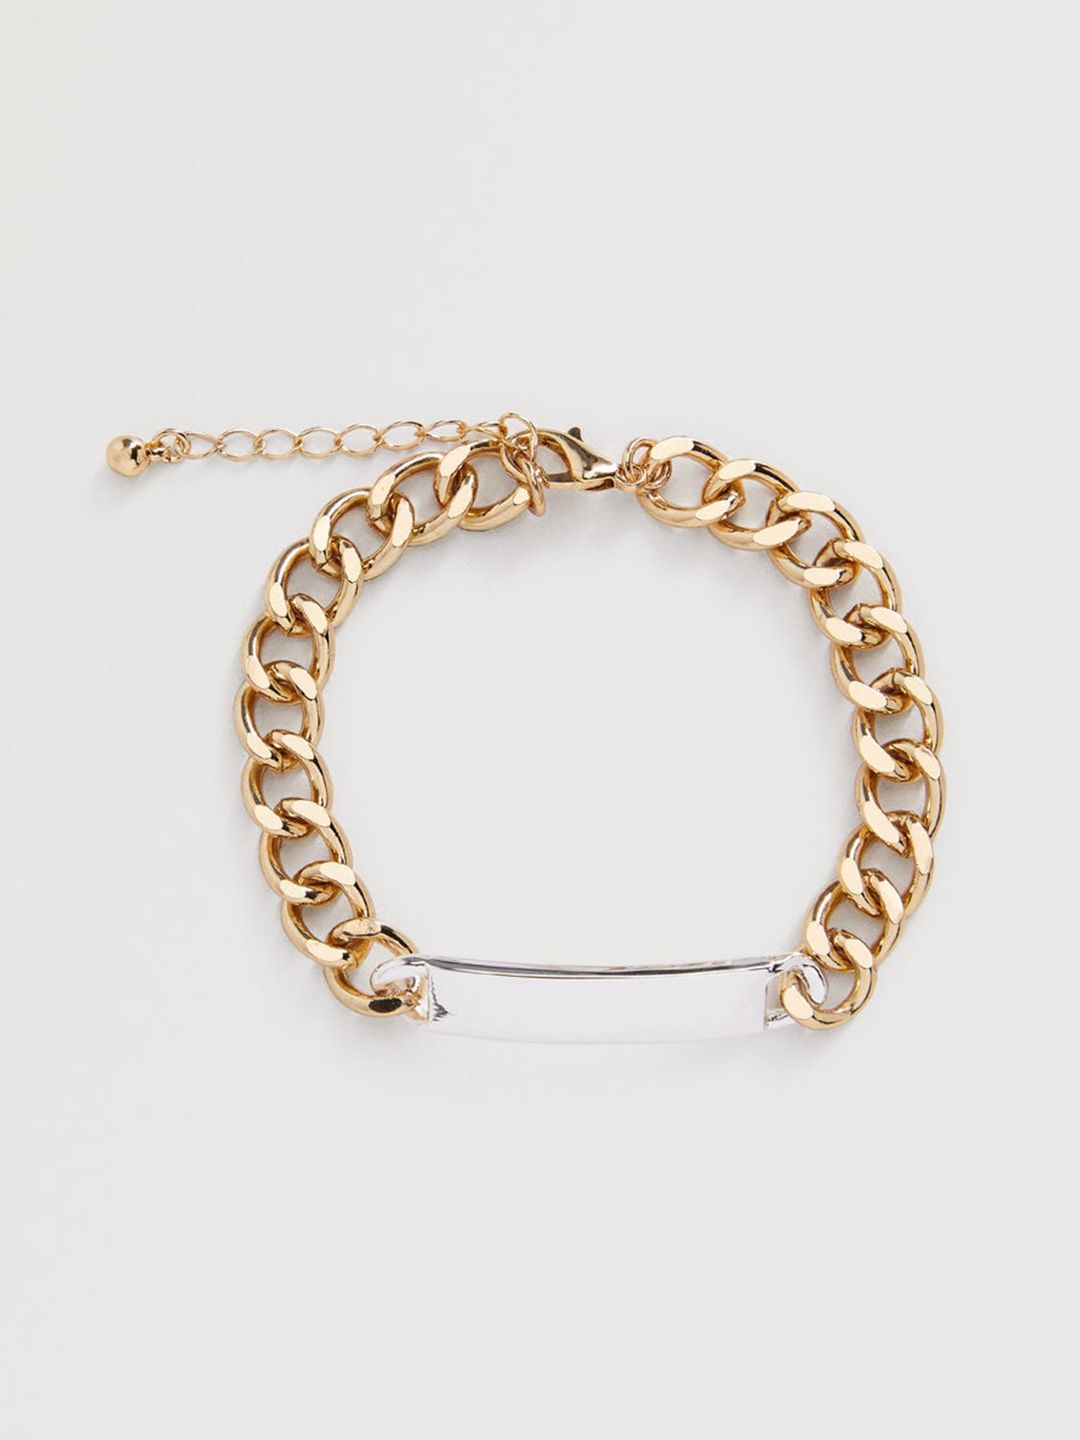 MANGO Women Gold-Toned & Silver-Toned Link Bracelet Price in India